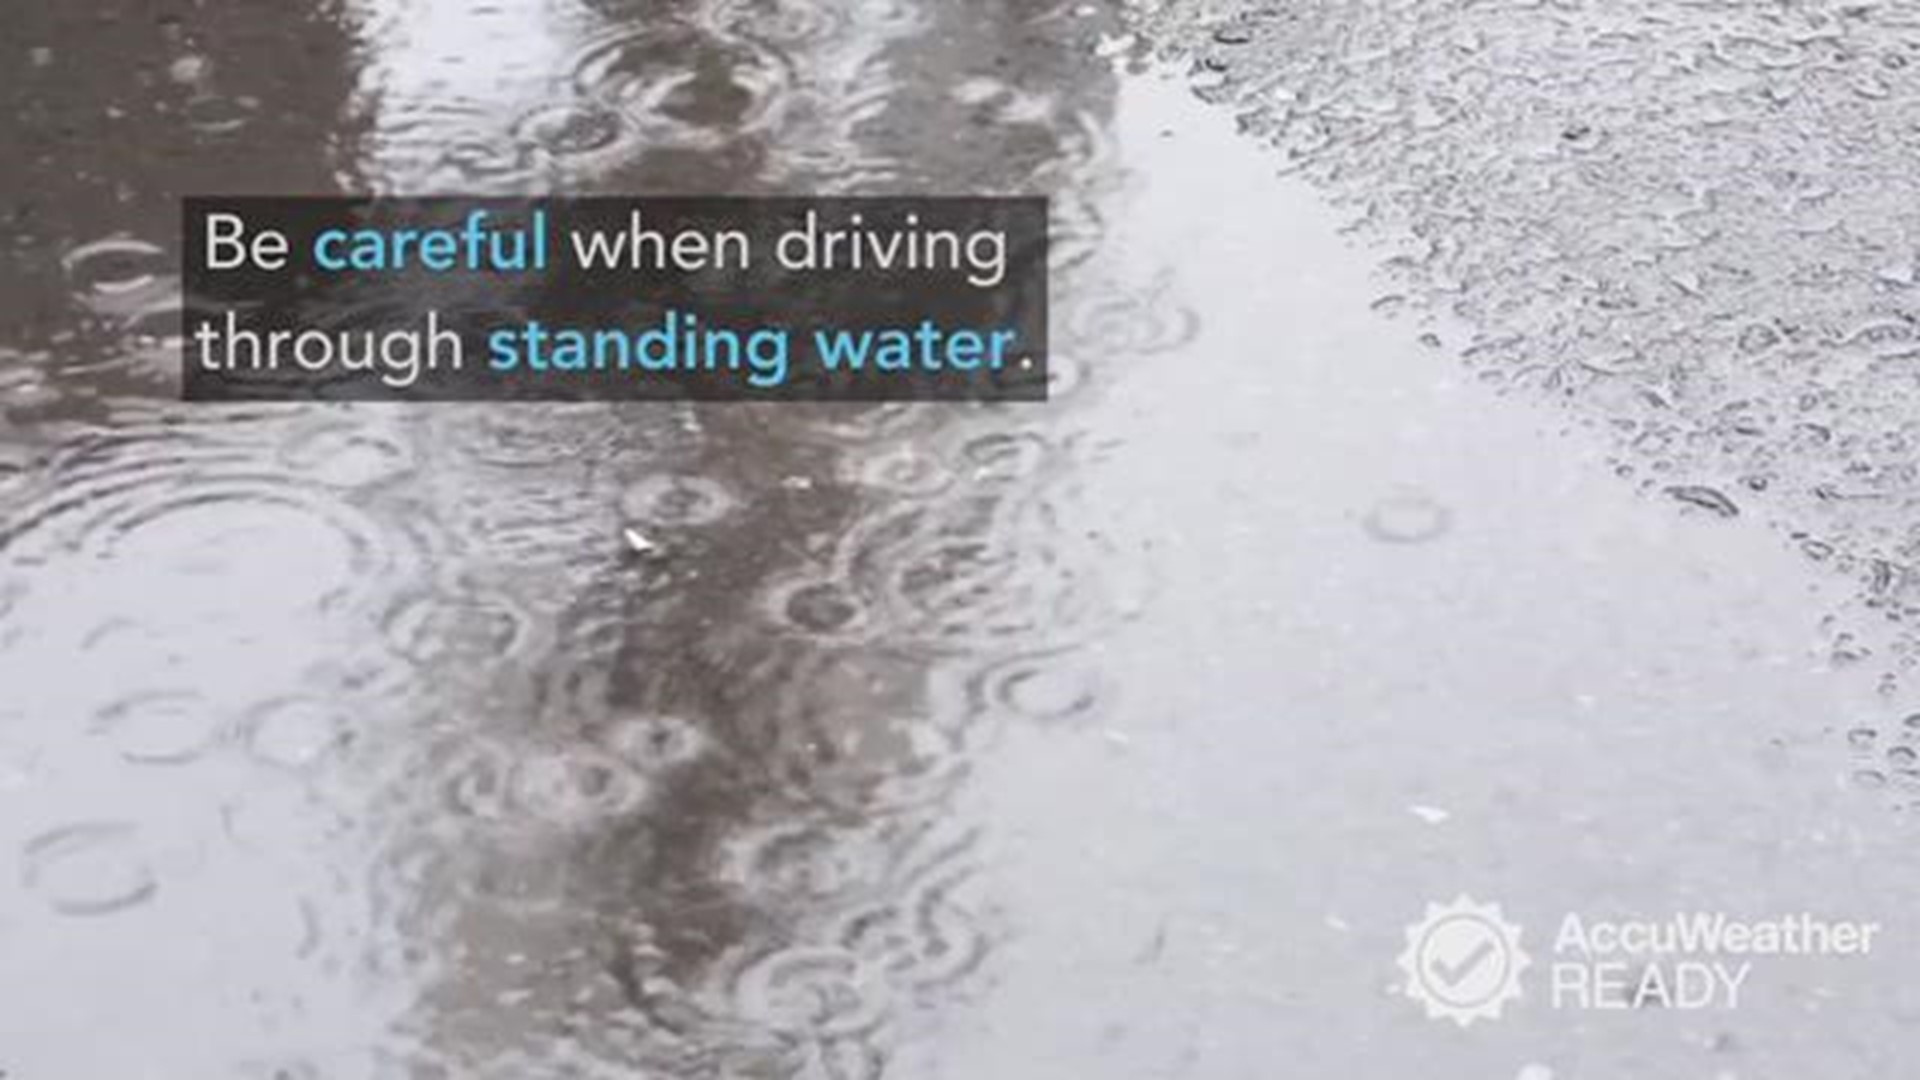 Most weather-related crashes happen on wet pavement and during rainfall, according to the United States Department of Transportation. Avoid an accident with these tips.